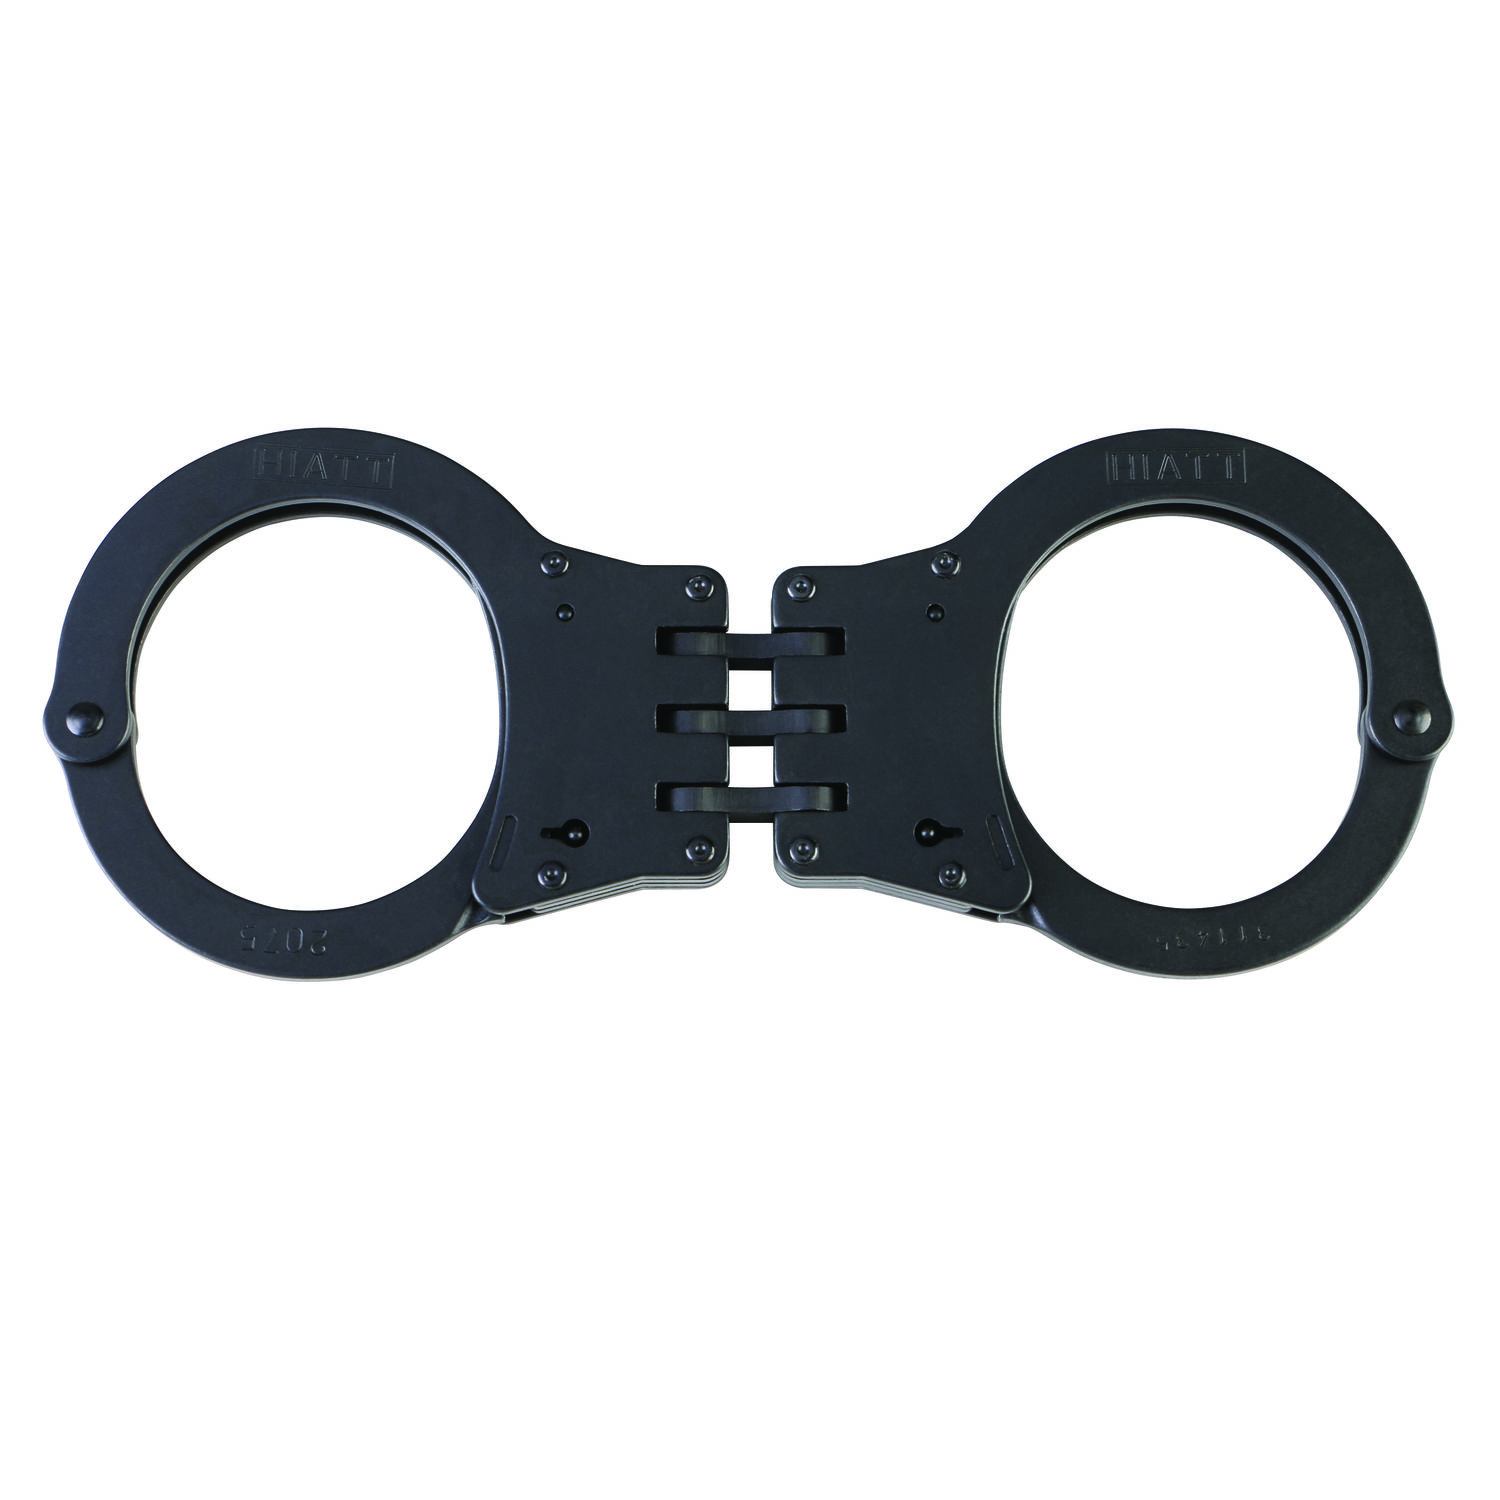 Standard Steel Hinge Handcuffs with Black Finish - The Safariland Group